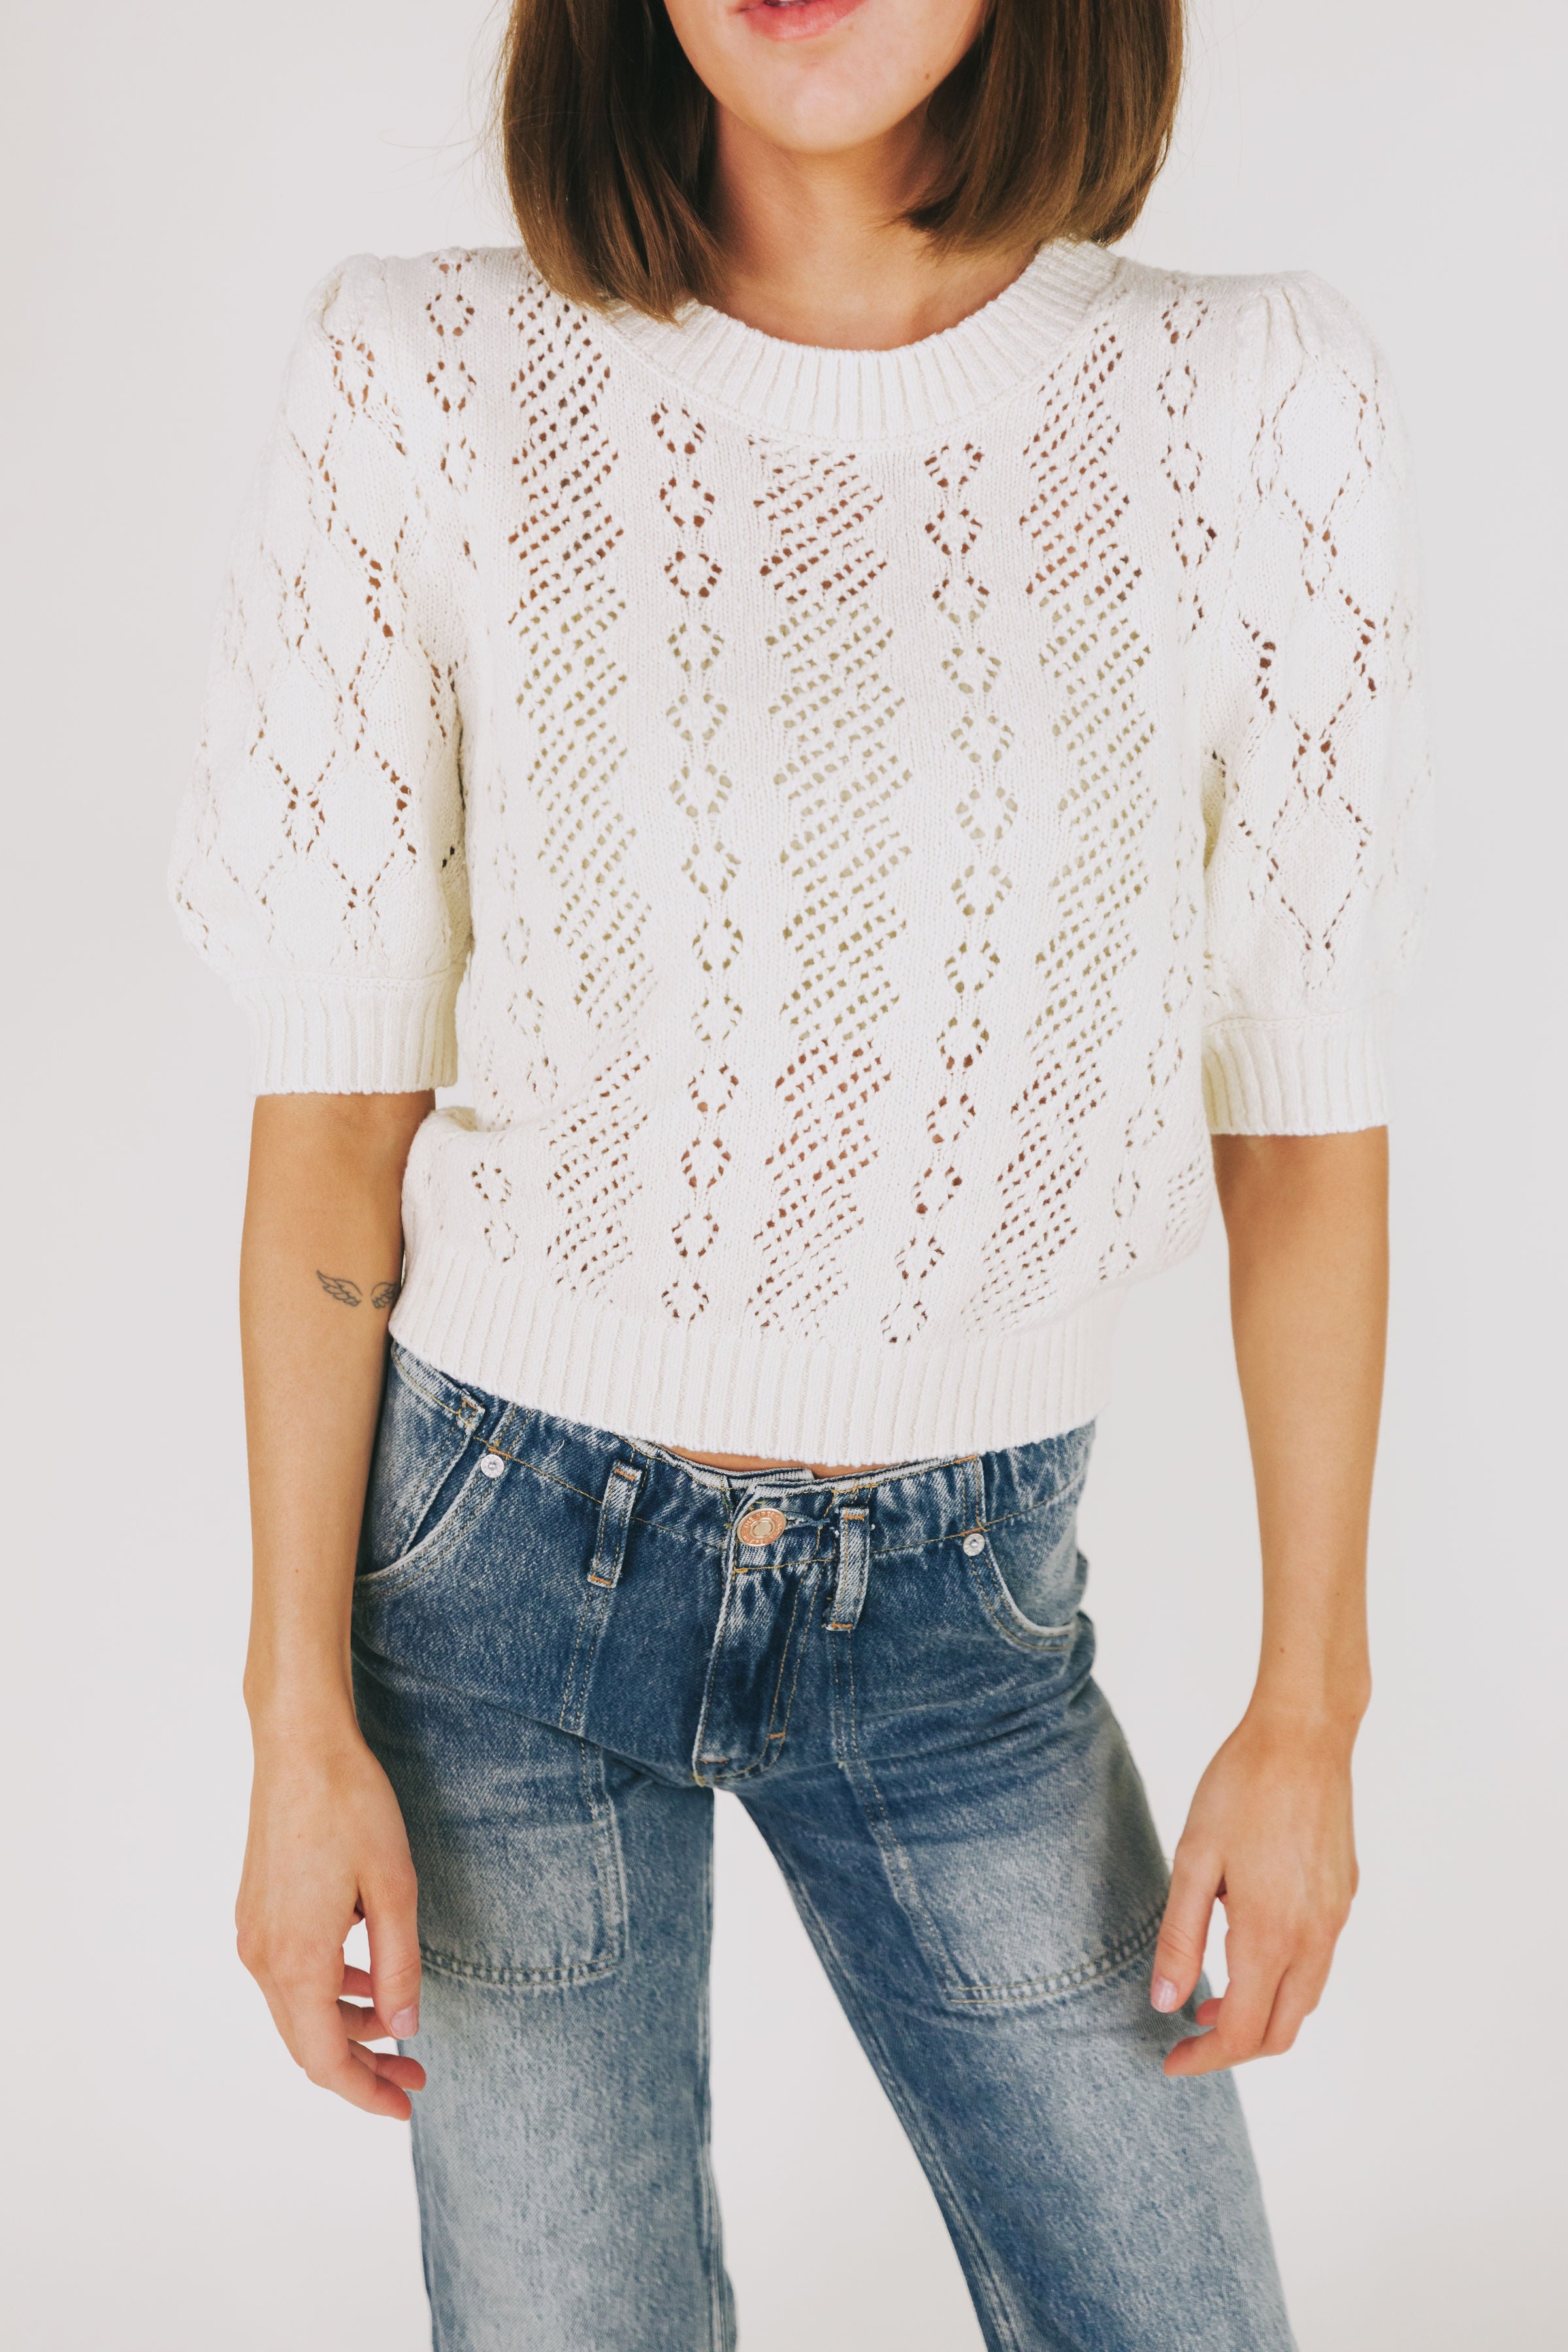 FREE PEOPLE - Eloise Pullover